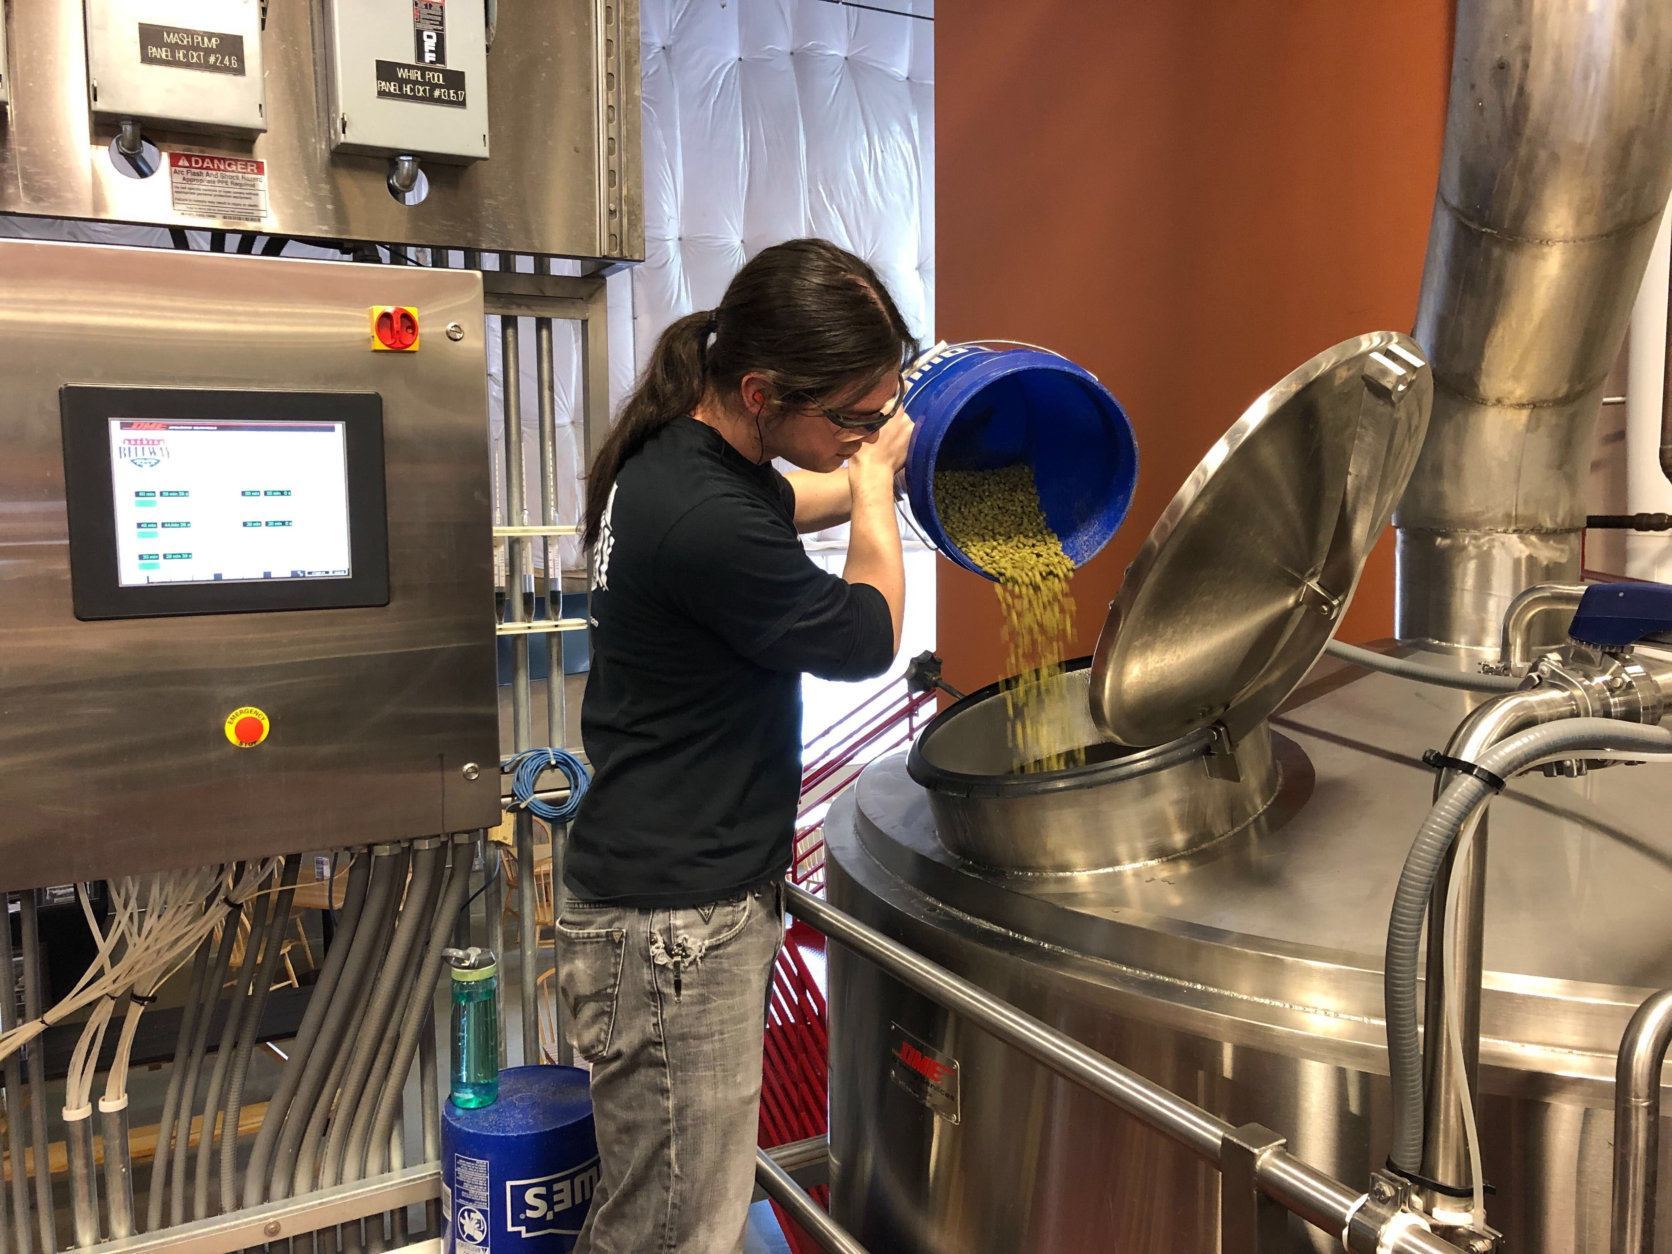 Beltway Brewing, which has only created two dozen or so of its own beers over the years, is also branching out to up its own beer brand game. (Courtesy Beltway Brewing)